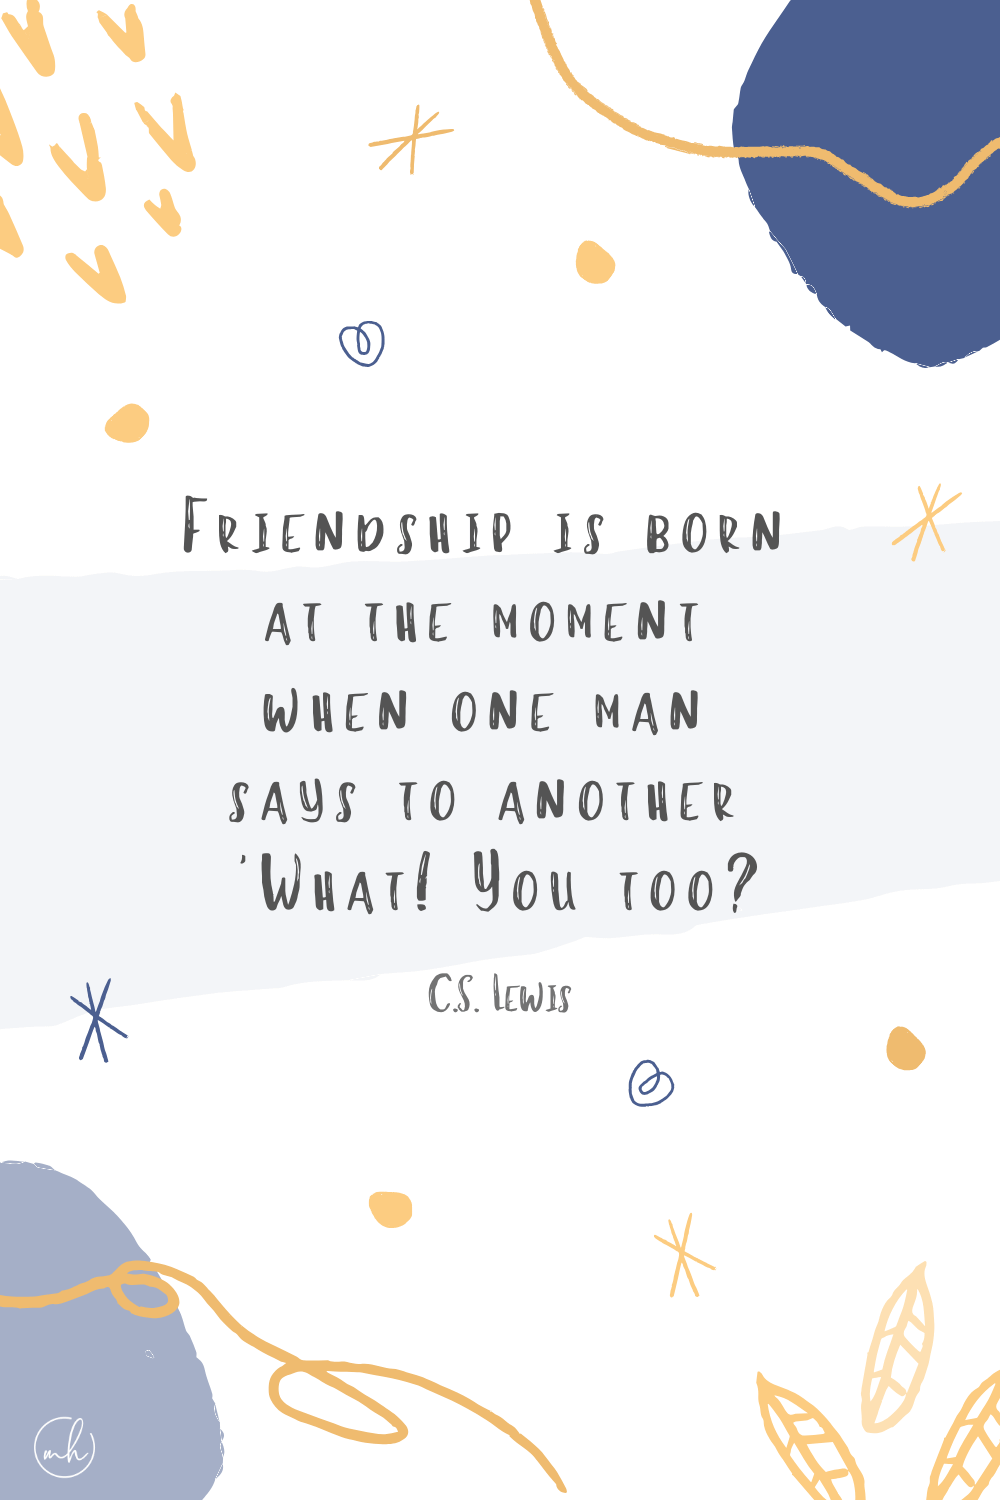 "Friendship is born at the moment when one man says to another 'What! You too?” - C.S. Lewis